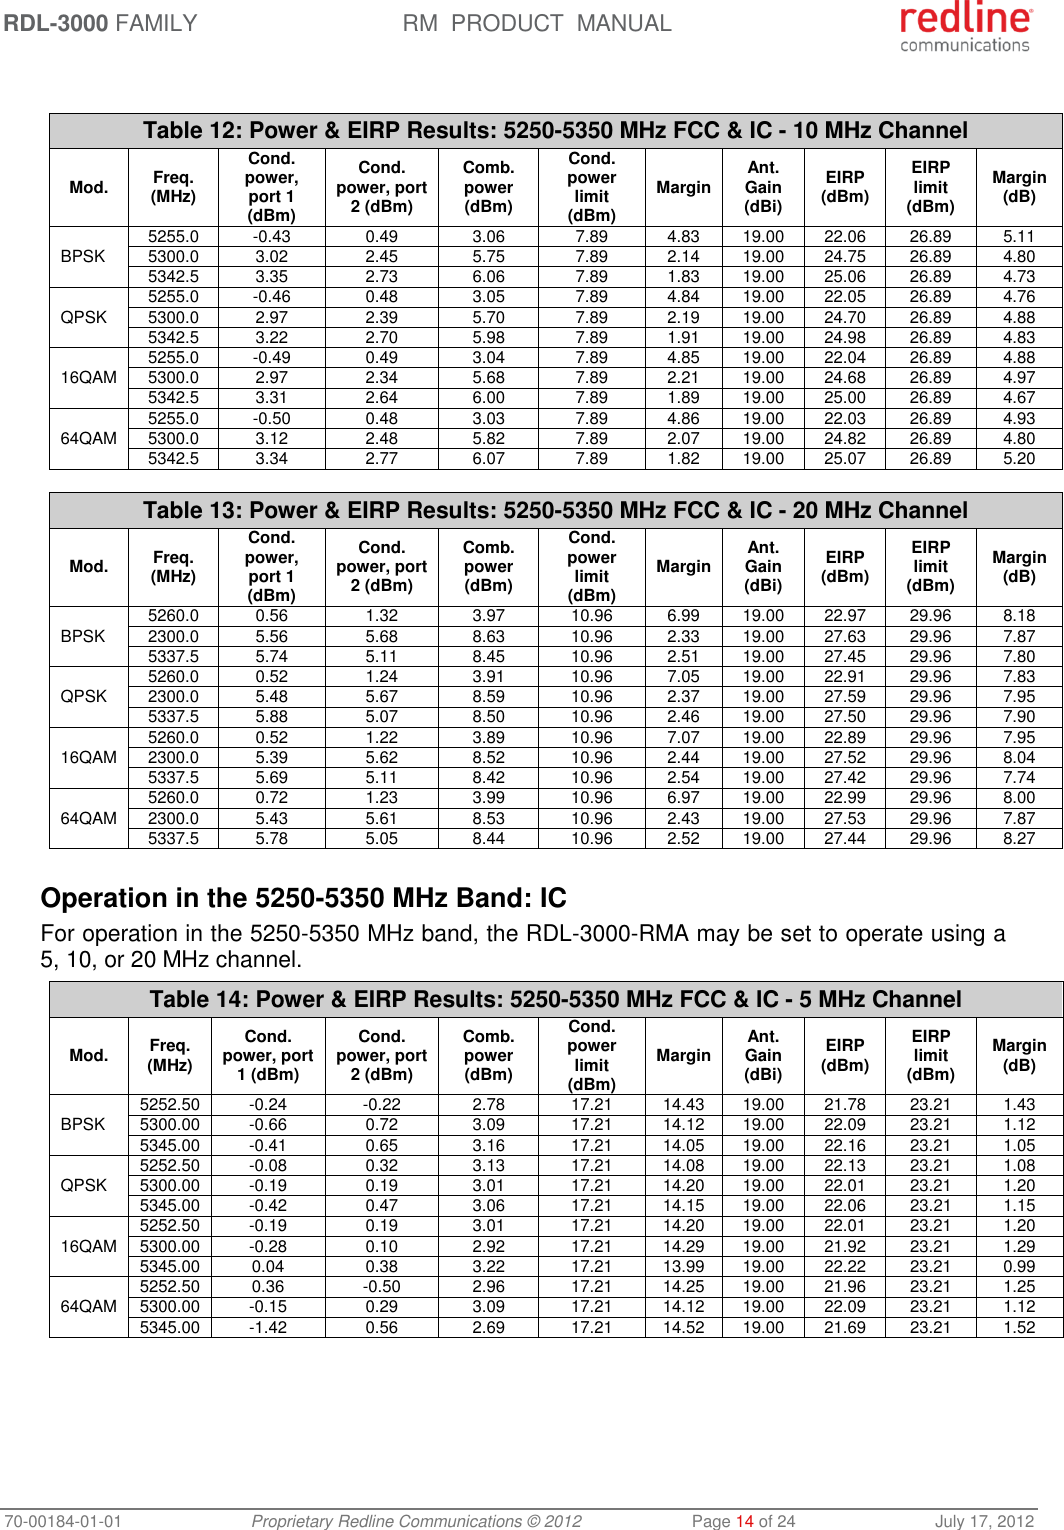 RDL-3000 FAMILY RM  PRODUCT  MANUAL 70-00184-01-01 Proprietary Redline Communications © 2012  Page 14 of 24  July 17, 2012   Table 12: Power &amp; EIRP Results: 5250-5350 MHz FCC &amp; IC - 10 MHz Channel Mod. Freq. (MHz) Cond. power, port 1 (dBm) Cond. power, port 2 (dBm) Comb. power (dBm) Cond. power limit (dBm) Margin Ant. Gain (dBi) EIRP (dBm) EIRP limit (dBm) Margin (dB) BPSK  5255.0 -0.43 0.49 3.06 7.89 4.83 19.00 22.06 26.89 5.11 5300.0 3.02 2.45 5.75 7.89 2.14 19.00 24.75 26.89 4.80 5342.5 3.35 2.73 6.06 7.89 1.83 19.00 25.06 26.89 4.73 QPSK 5255.0 -0.46 0.48 3.05 7.89 4.84 19.00 22.05 26.89 4.76 5300.0 2.97 2.39 5.70 7.89 2.19 19.00 24.70 26.89 4.88 5342.5 3.22 2.70 5.98 7.89 1.91 19.00 24.98 26.89 4.83 16QAM 5255.0 -0.49 0.49 3.04 7.89 4.85 19.00 22.04 26.89 4.88 5300.0 2.97 2.34 5.68 7.89 2.21 19.00 24.68 26.89 4.97 5342.5 3.31 2.64 6.00 7.89 1.89 19.00 25.00 26.89 4.67 64QAM 5255.0 -0.50 0.48 3.03 7.89 4.86 19.00 22.03 26.89 4.93 5300.0 3.12 2.48 5.82 7.89 2.07 19.00 24.82 26.89 4.80 5342.5 3.34 2.77 6.07 7.89 1.82 19.00 25.07 26.89 5.20  Table 13: Power &amp; EIRP Results: 5250-5350 MHz FCC &amp; IC - 20 MHz Channel Mod. Freq. (MHz) Cond. power, port 1 (dBm) Cond. power, port 2 (dBm) Comb. power (dBm) Cond. power limit (dBm) Margin Ant. Gain (dBi) EIRP (dBm) EIRP limit (dBm) Margin (dB) BPSK  5260.0 0.56 1.32 3.97 10.96 6.99 19.00 22.97 29.96 8.18 2300.0 5.56 5.68 8.63 10.96 2.33 19.00 27.63 29.96 7.87 5337.5 5.74 5.11 8.45 10.96 2.51 19.00 27.45 29.96 7.80 QPSK 5260.0 0.52 1.24 3.91 10.96 7.05 19.00 22.91 29.96 7.83 2300.0 5.48 5.67 8.59 10.96 2.37 19.00 27.59 29.96 7.95 5337.5 5.88 5.07 8.50 10.96 2.46 19.00 27.50 29.96 7.90 16QAM 5260.0 0.52 1.22 3.89 10.96 7.07 19.00 22.89 29.96 7.95 2300.0 5.39 5.62 8.52 10.96 2.44 19.00 27.52 29.96 8.04 5337.5 5.69 5.11 8.42 10.96 2.54 19.00 27.42 29.96 7.74 64QAM 5260.0 0.72 1.23 3.99 10.96 6.97 19.00 22.99 29.96 8.00 2300.0 5.43 5.61 8.53 10.96 2.43 19.00 27.53 29.96 7.87 5337.5 5.78 5.05 8.44 10.96 2.52 19.00 27.44 29.96 8.27   Operation in the 5250-5350 MHz Band: IC For operation in the 5250-5350 MHz band, the RDL-3000-RMA may be set to operate using a 5, 10, or 20 MHz channel. Table 14: Power &amp; EIRP Results: 5250-5350 MHz FCC &amp; IC - 5 MHz Channel Mod. Freq. (MHz) Cond. power, port 1 (dBm) Cond. power, port 2 (dBm) Comb. power (dBm) Cond. power limit (dBm) Margin Ant. Gain (dBi) EIRP (dBm) EIRP limit (dBm) Margin (dB) BPSK  5252.50 -0.24 -0.22 2.78 17.21 14.43 19.00 21.78 23.21 1.43 5300.00 -0.66 0.72 3.09 17.21 14.12 19.00 22.09 23.21 1.12 5345.00 -0.41 0.65 3.16 17.21 14.05 19.00 22.16 23.21 1.05 QPSK 5252.50 -0.08 0.32 3.13 17.21 14.08 19.00 22.13 23.21 1.08 5300.00 -0.19 0.19 3.01 17.21 14.20 19.00 22.01 23.21 1.20 5345.00 -0.42 0.47 3.06 17.21 14.15 19.00 22.06 23.21 1.15 16QAM 5252.50 -0.19 0.19 3.01 17.21 14.20 19.00 22.01 23.21 1.20 5300.00 -0.28 0.10 2.92 17.21 14.29 19.00 21.92 23.21 1.29 5345.00 0.04 0.38 3.22 17.21 13.99 19.00 22.22 23.21 0.99 64QAM 5252.50 0.36 -0.50 2.96 17.21 14.25 19.00 21.96 23.21 1.25 5300.00 -0.15 0.29 3.09 17.21 14.12 19.00 22.09 23.21 1.12 5345.00 -1.42 0.56 2.69 17.21 14.52 19.00 21.69 23.21 1.52  